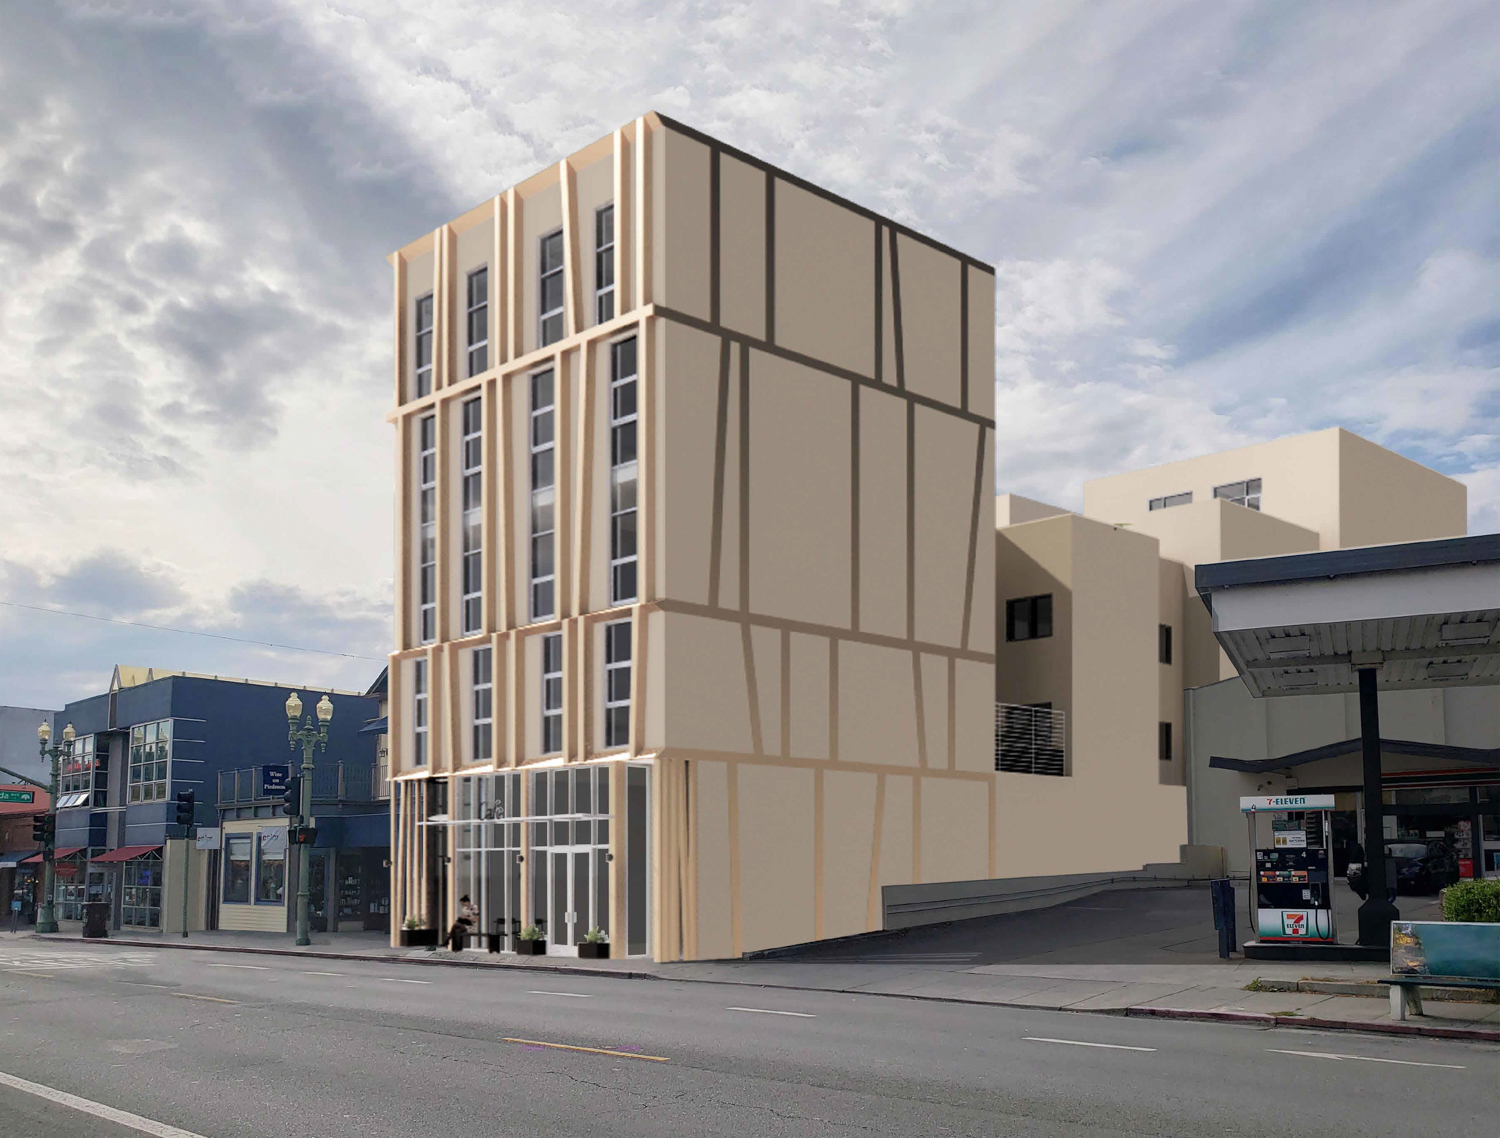 4185 Piedmont Avenue, rendering by Kava Massih Architects